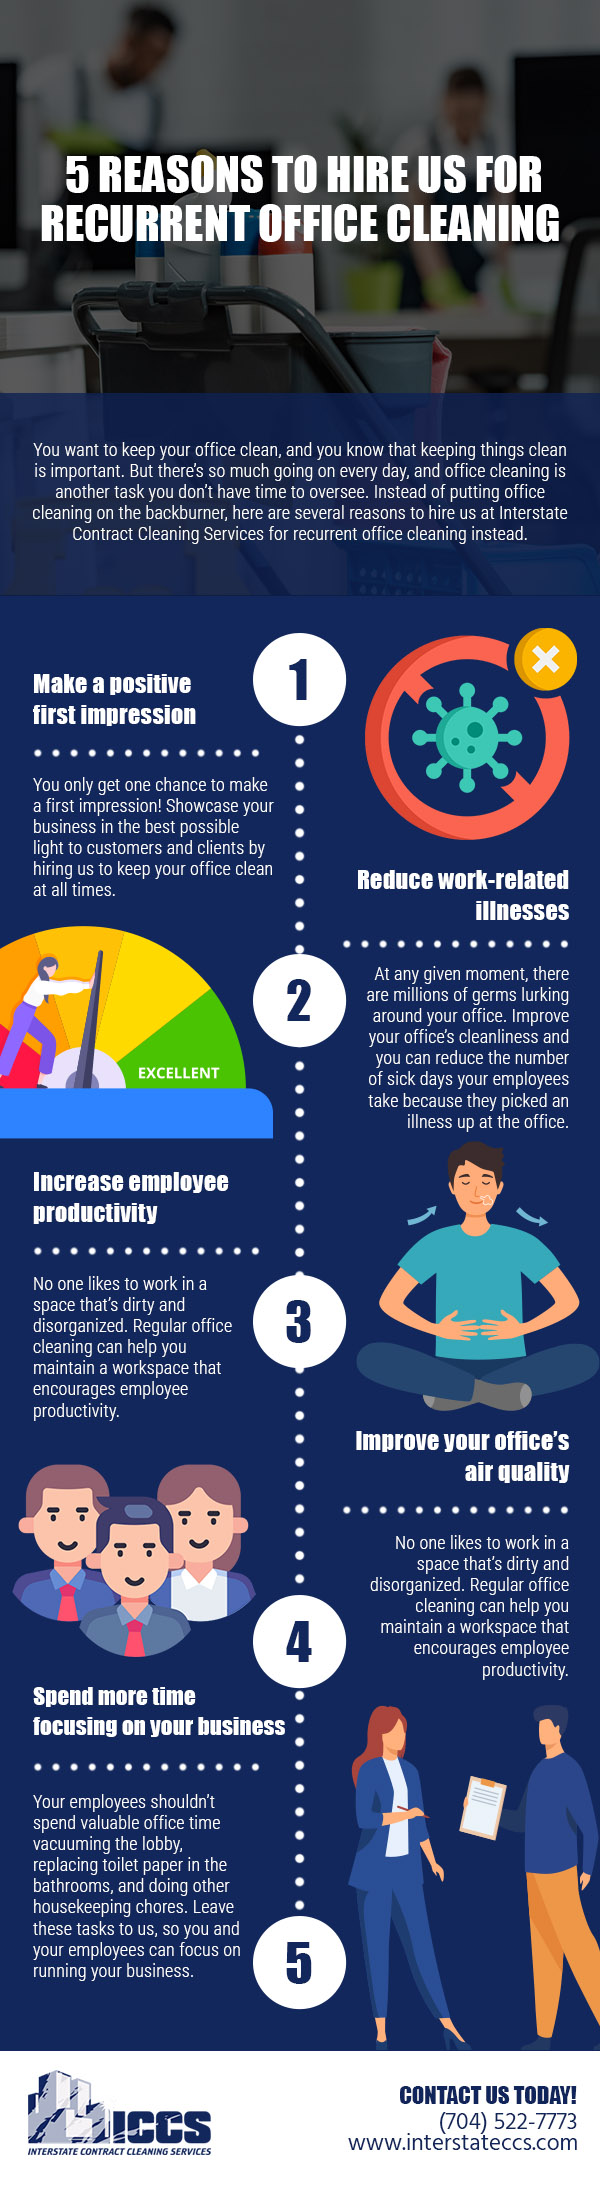 5 Reasons to Hire Us for Recurrent Office Cleaning